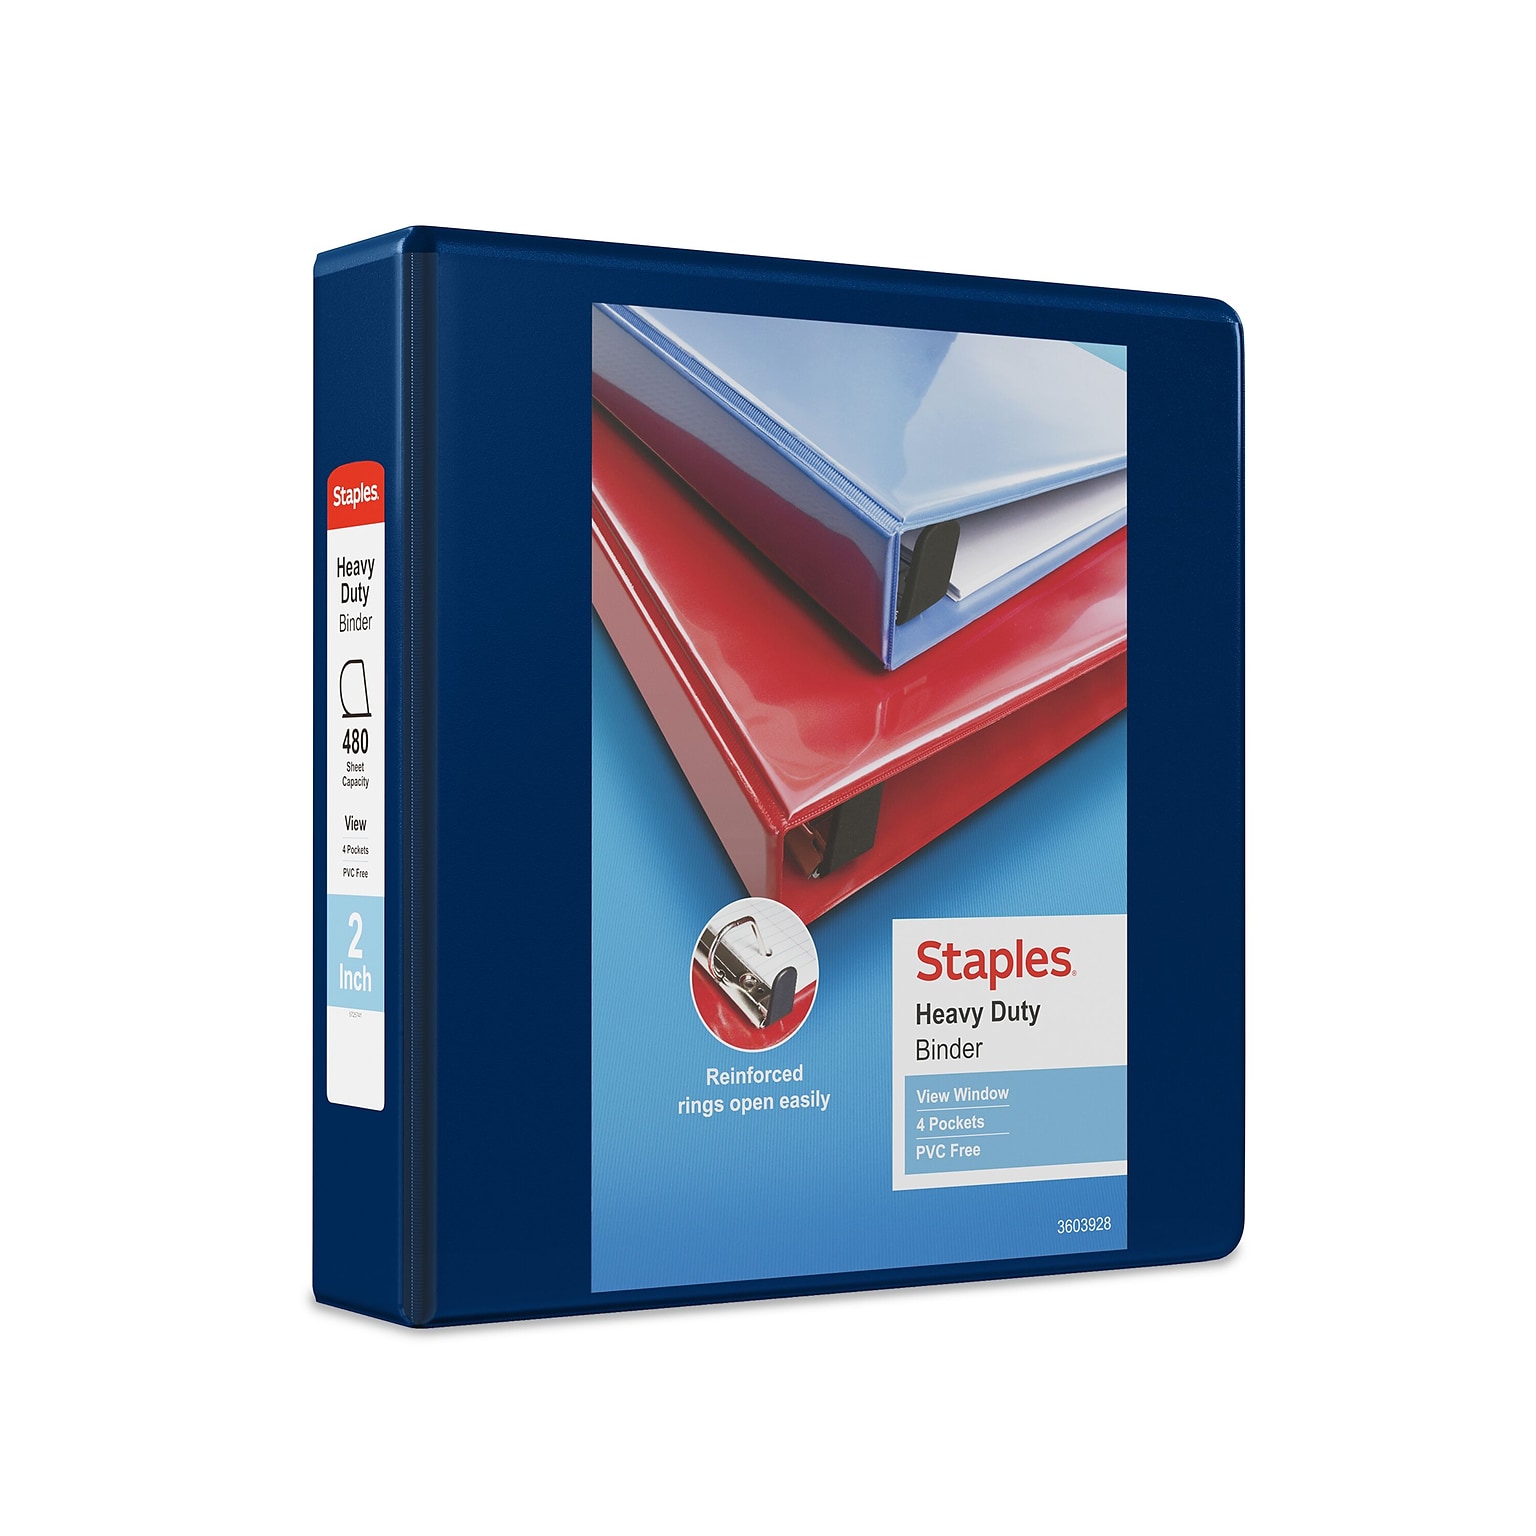 Staples® Heavy Duty 2 3 Ring View Binder with D-Rings, Navy Blue (ST56270-CC)